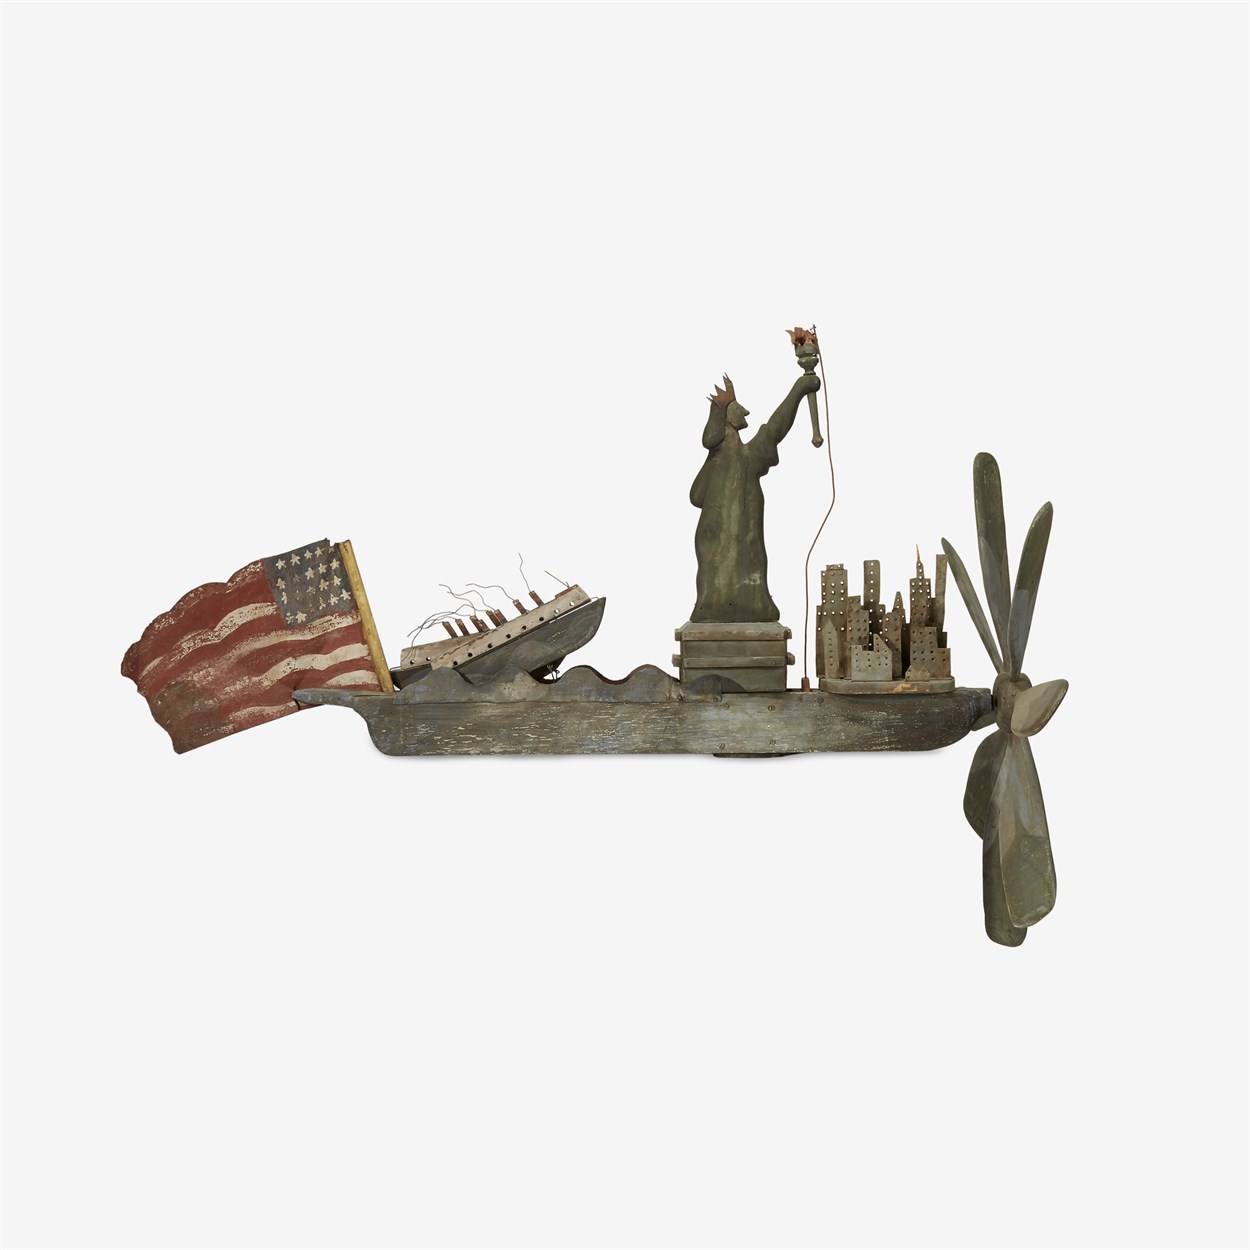 Lot 315 - Carved and painted whirligig of the Statue of Liberty and New York Harbor